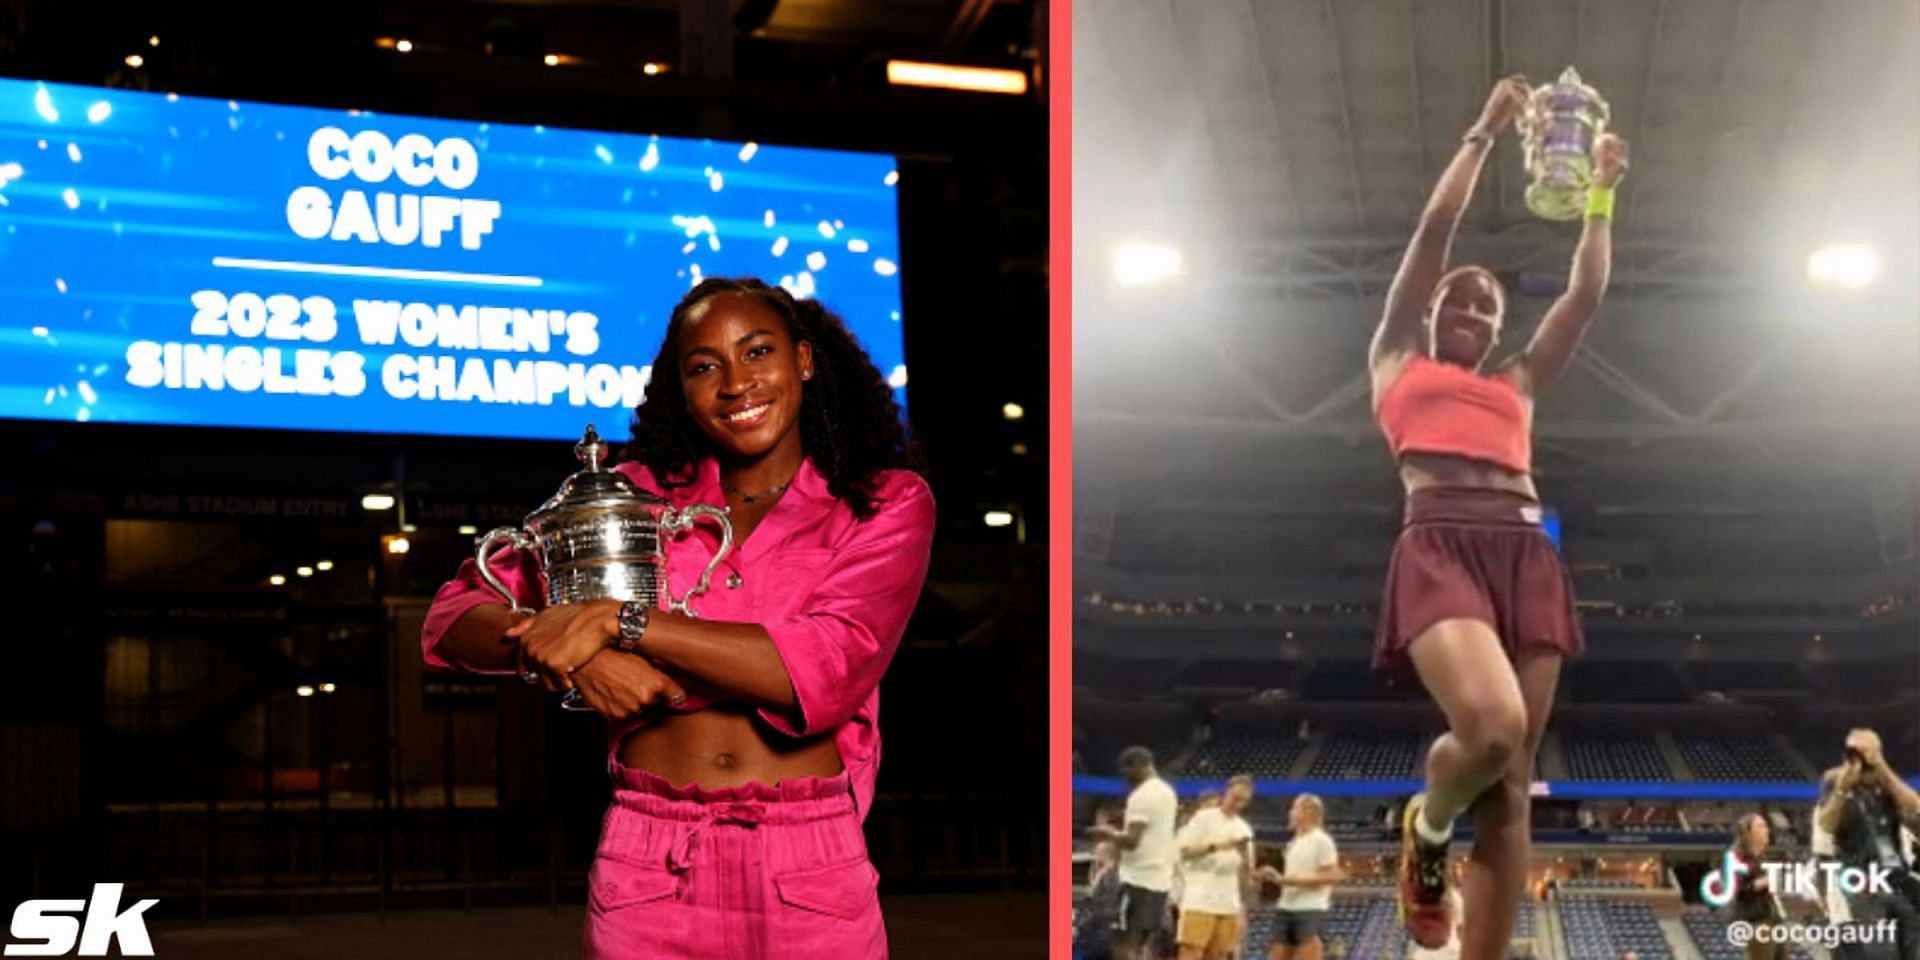 Coco Gauff dances to DJ Khaled's song 'All I Do Is Win' with her trophy in first TikTok after maiden Grand Slam win at US Open 2023